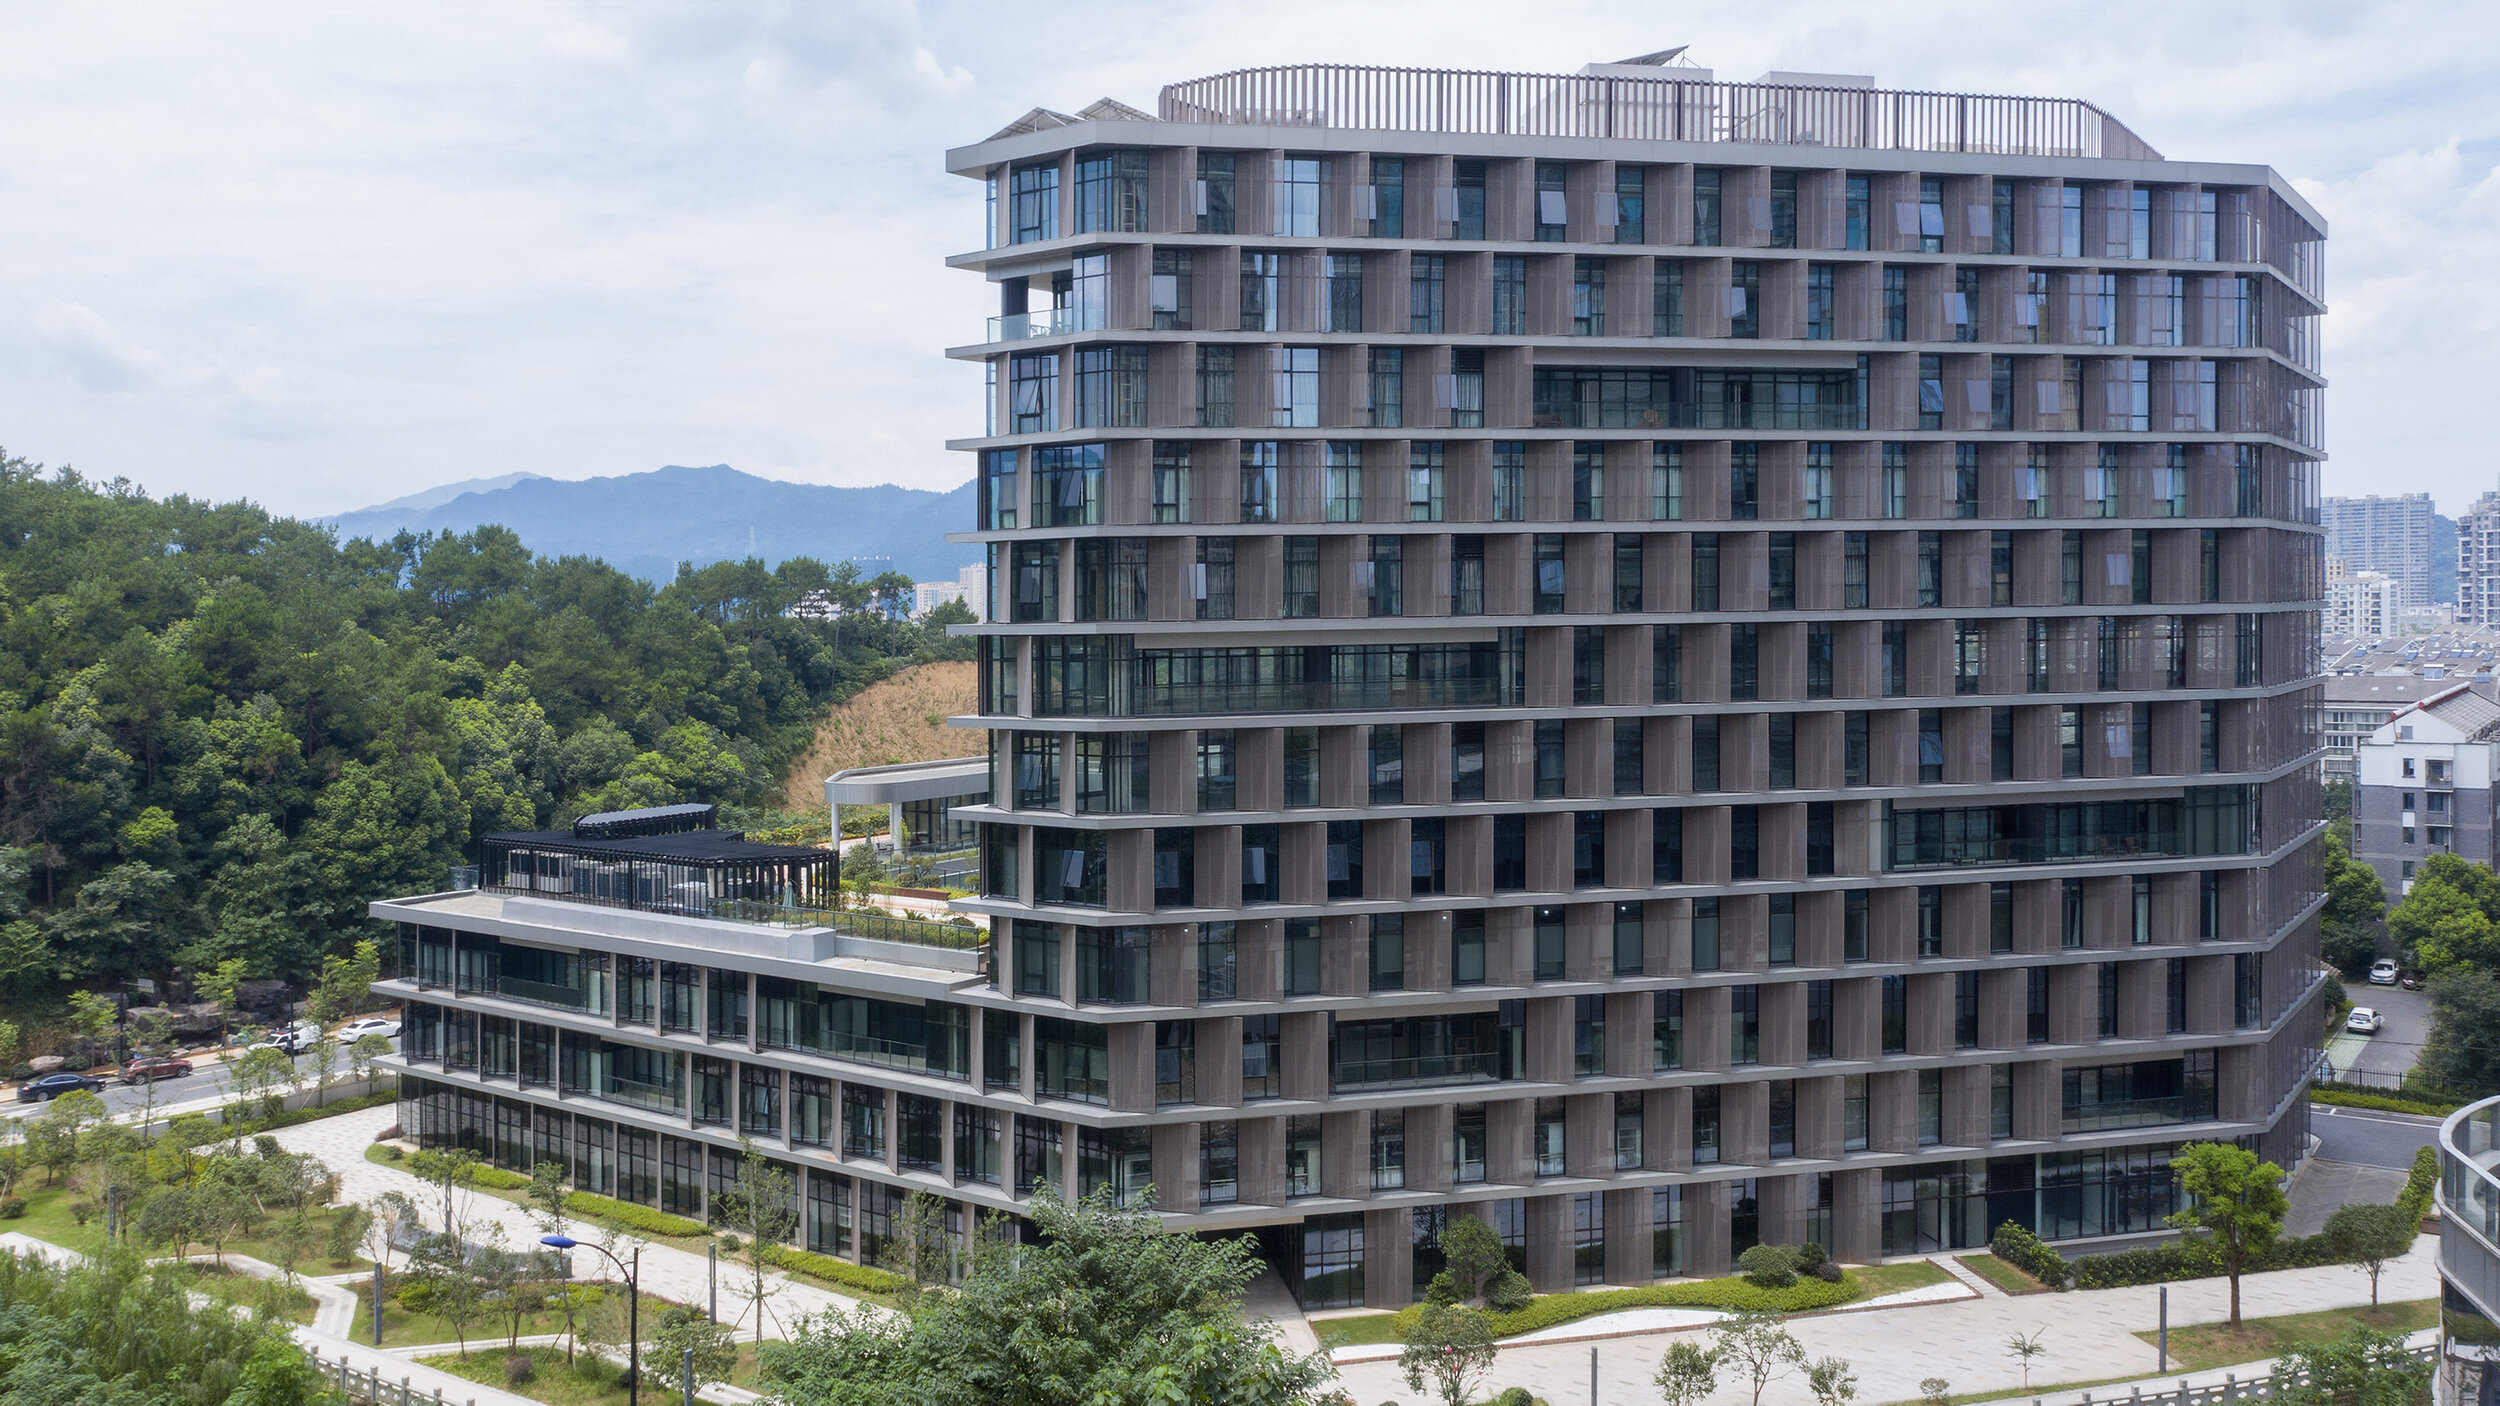 Hangzhou-Tonglu-Archives-Building-BAU-13-Perimeter-block-with-a-tower-extrusion-a-useful-hybrid.jpg